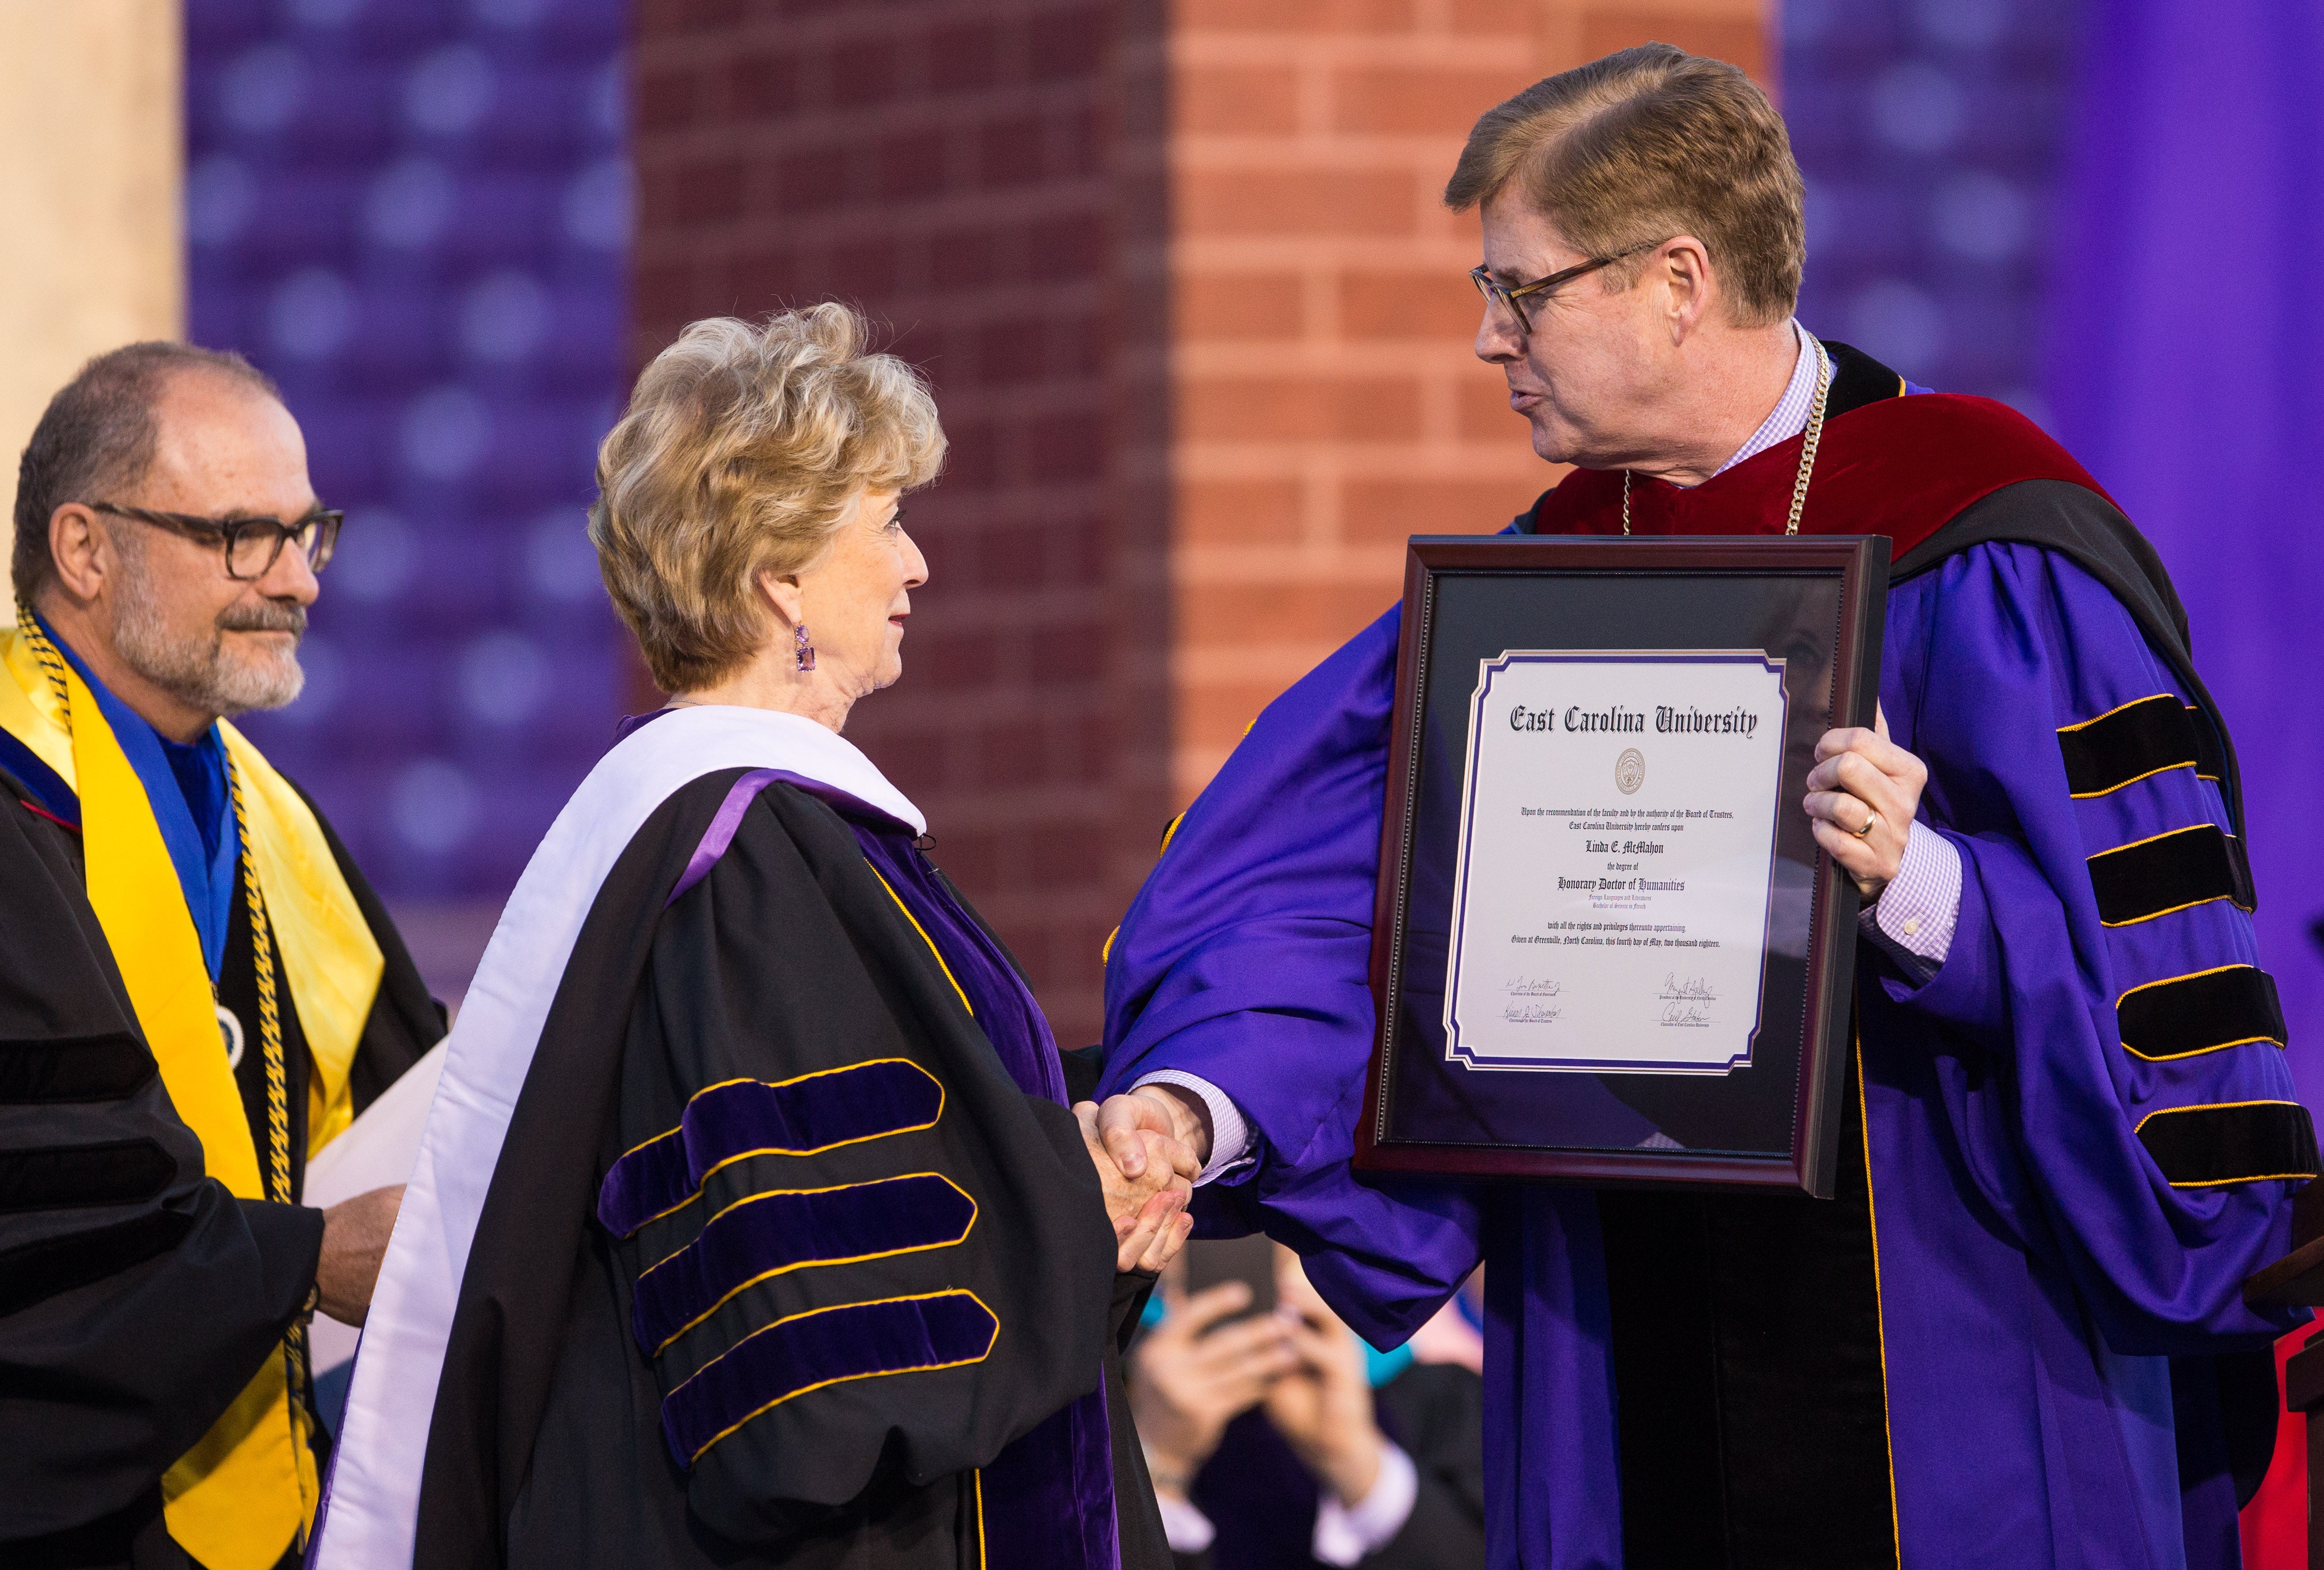 Chancellor Cecil Staton honors Linda McMahon with a honorary doctor of humanities degree.